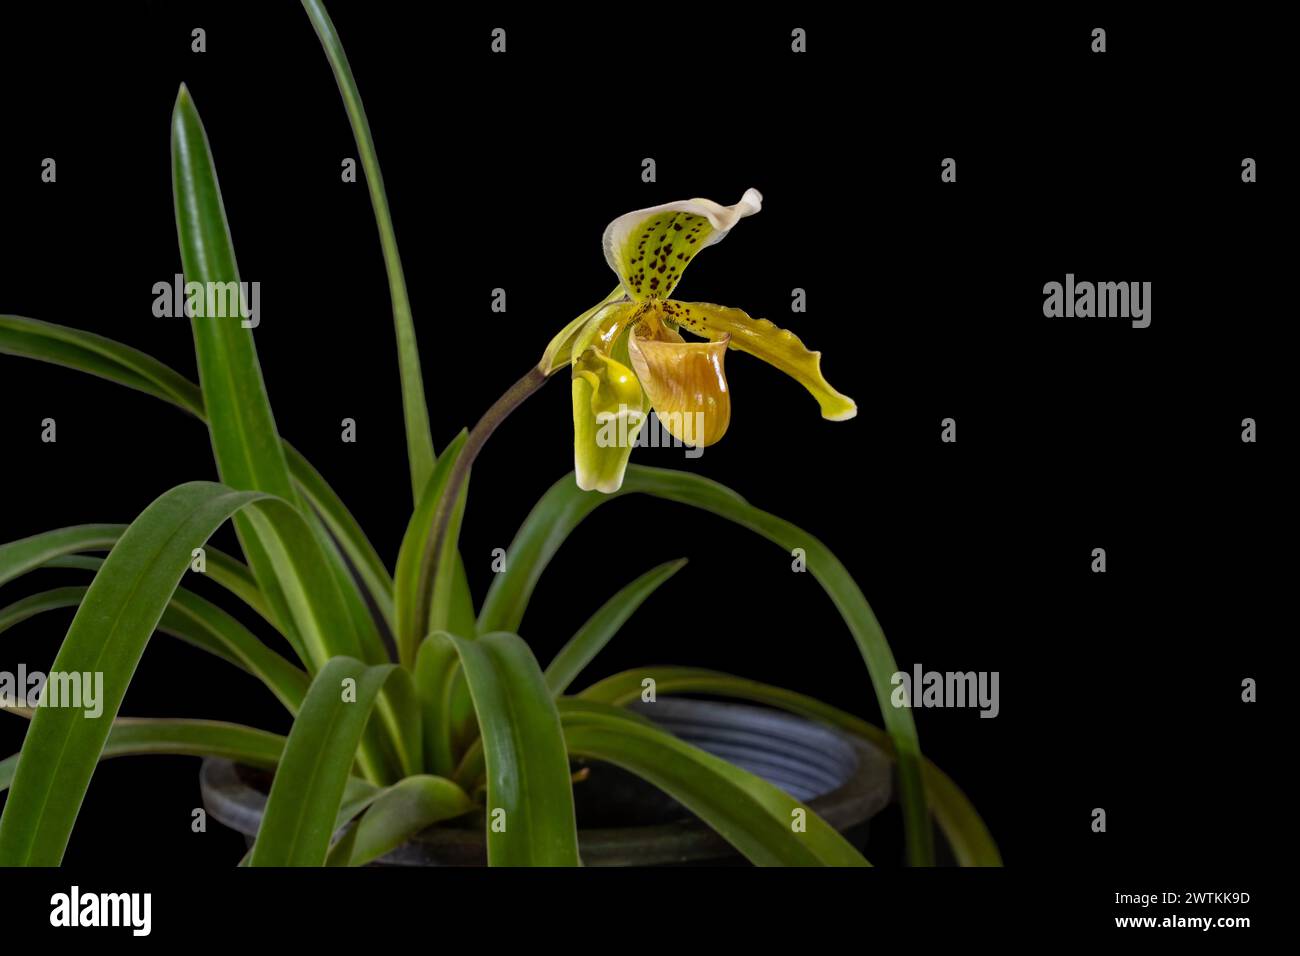 Closeup view of bright yellow brown and green flower of blooming lady slipper orchid species paphiopedilum exul isolated on black background Stock Photo